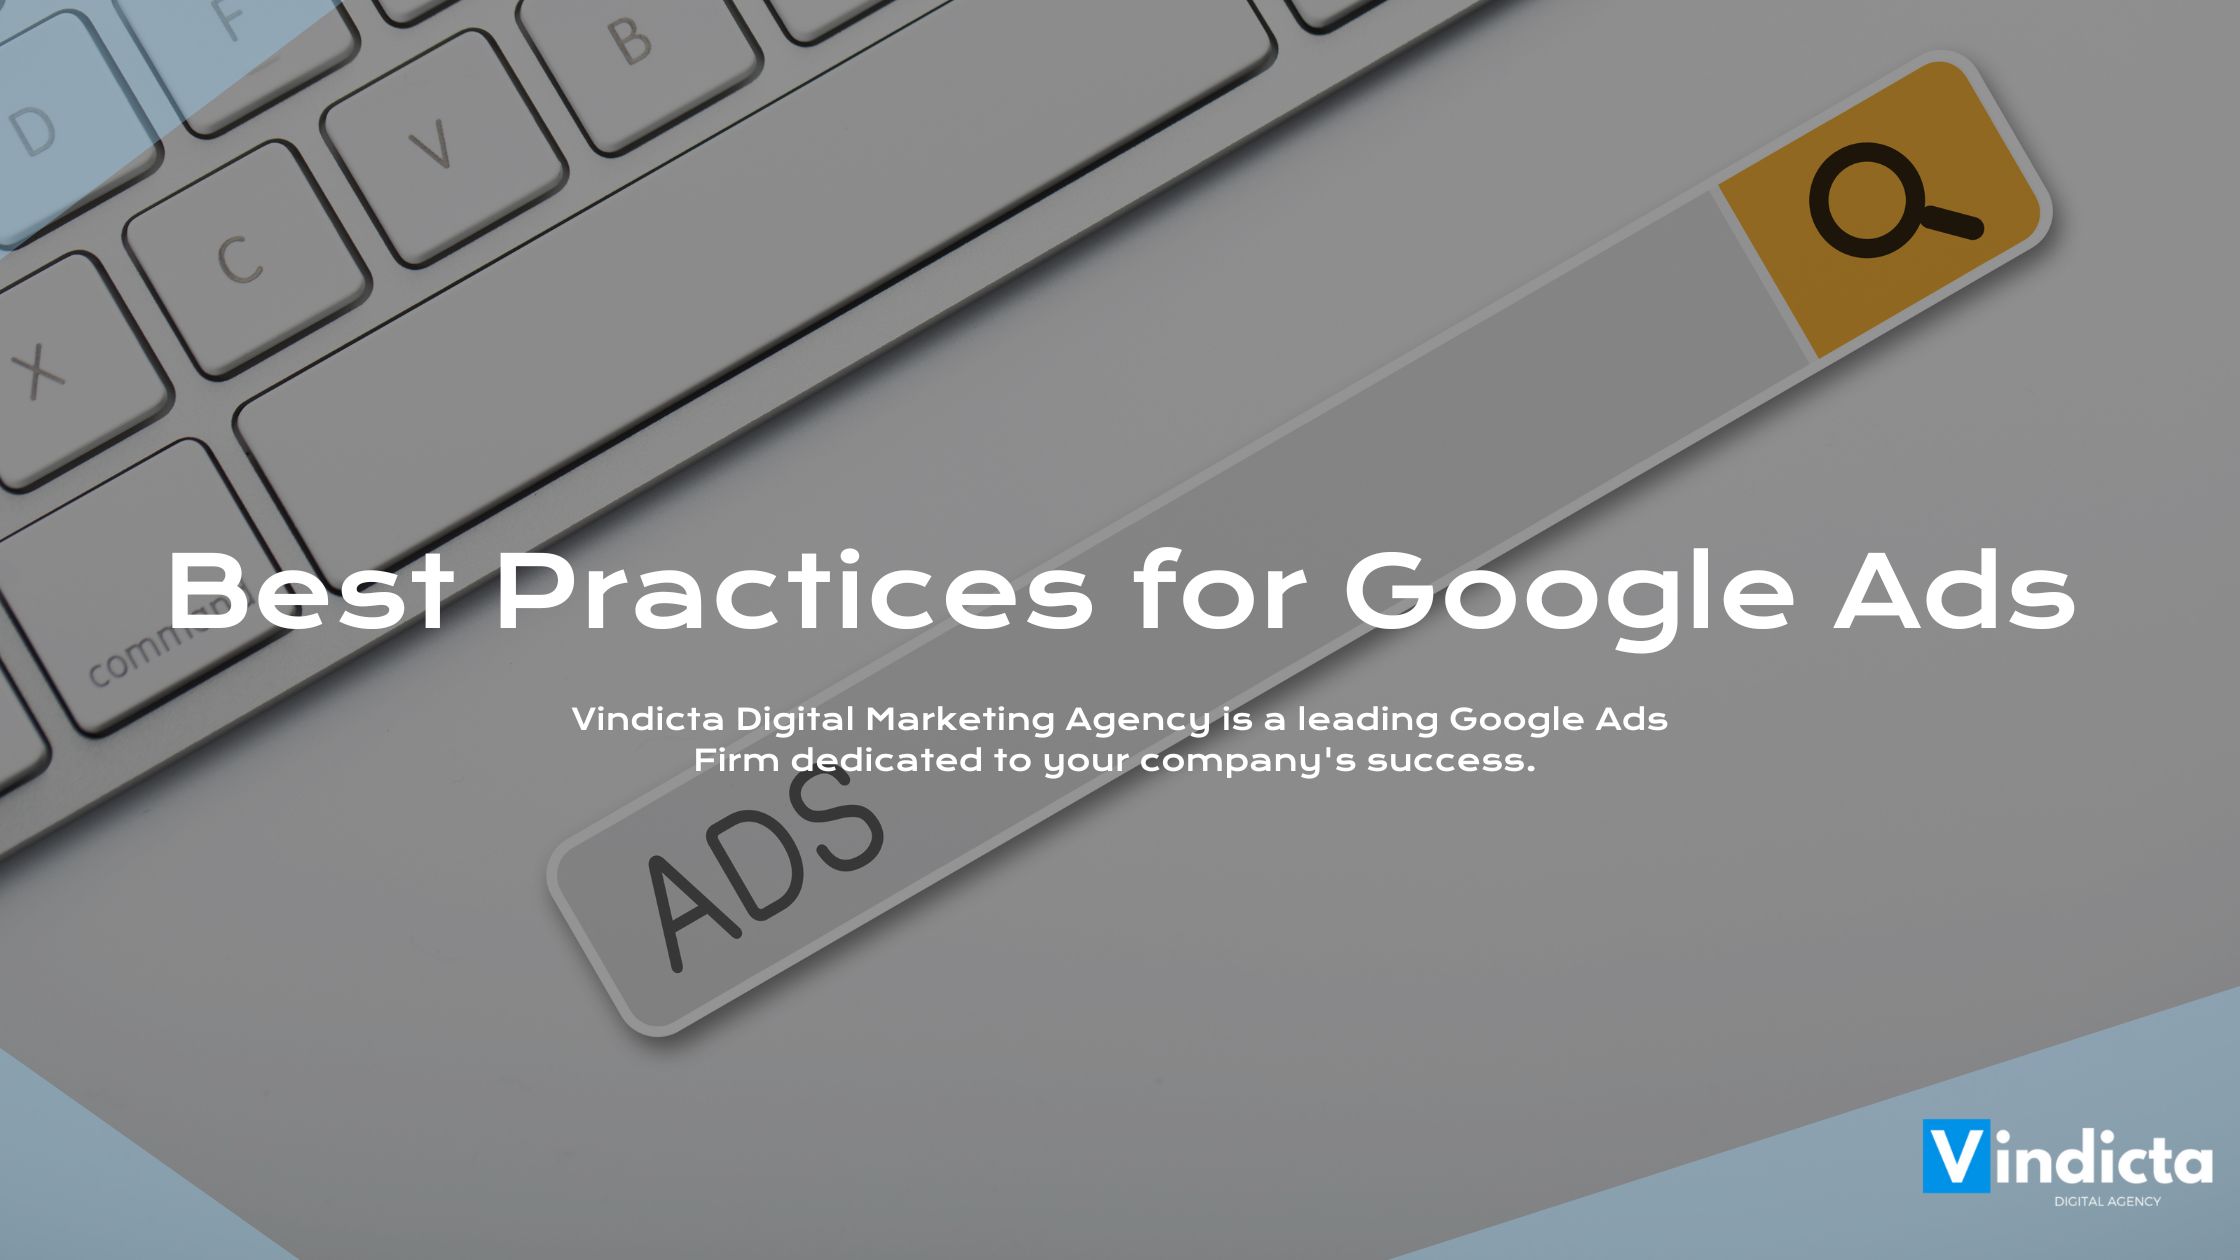 Best practices for Google Ads